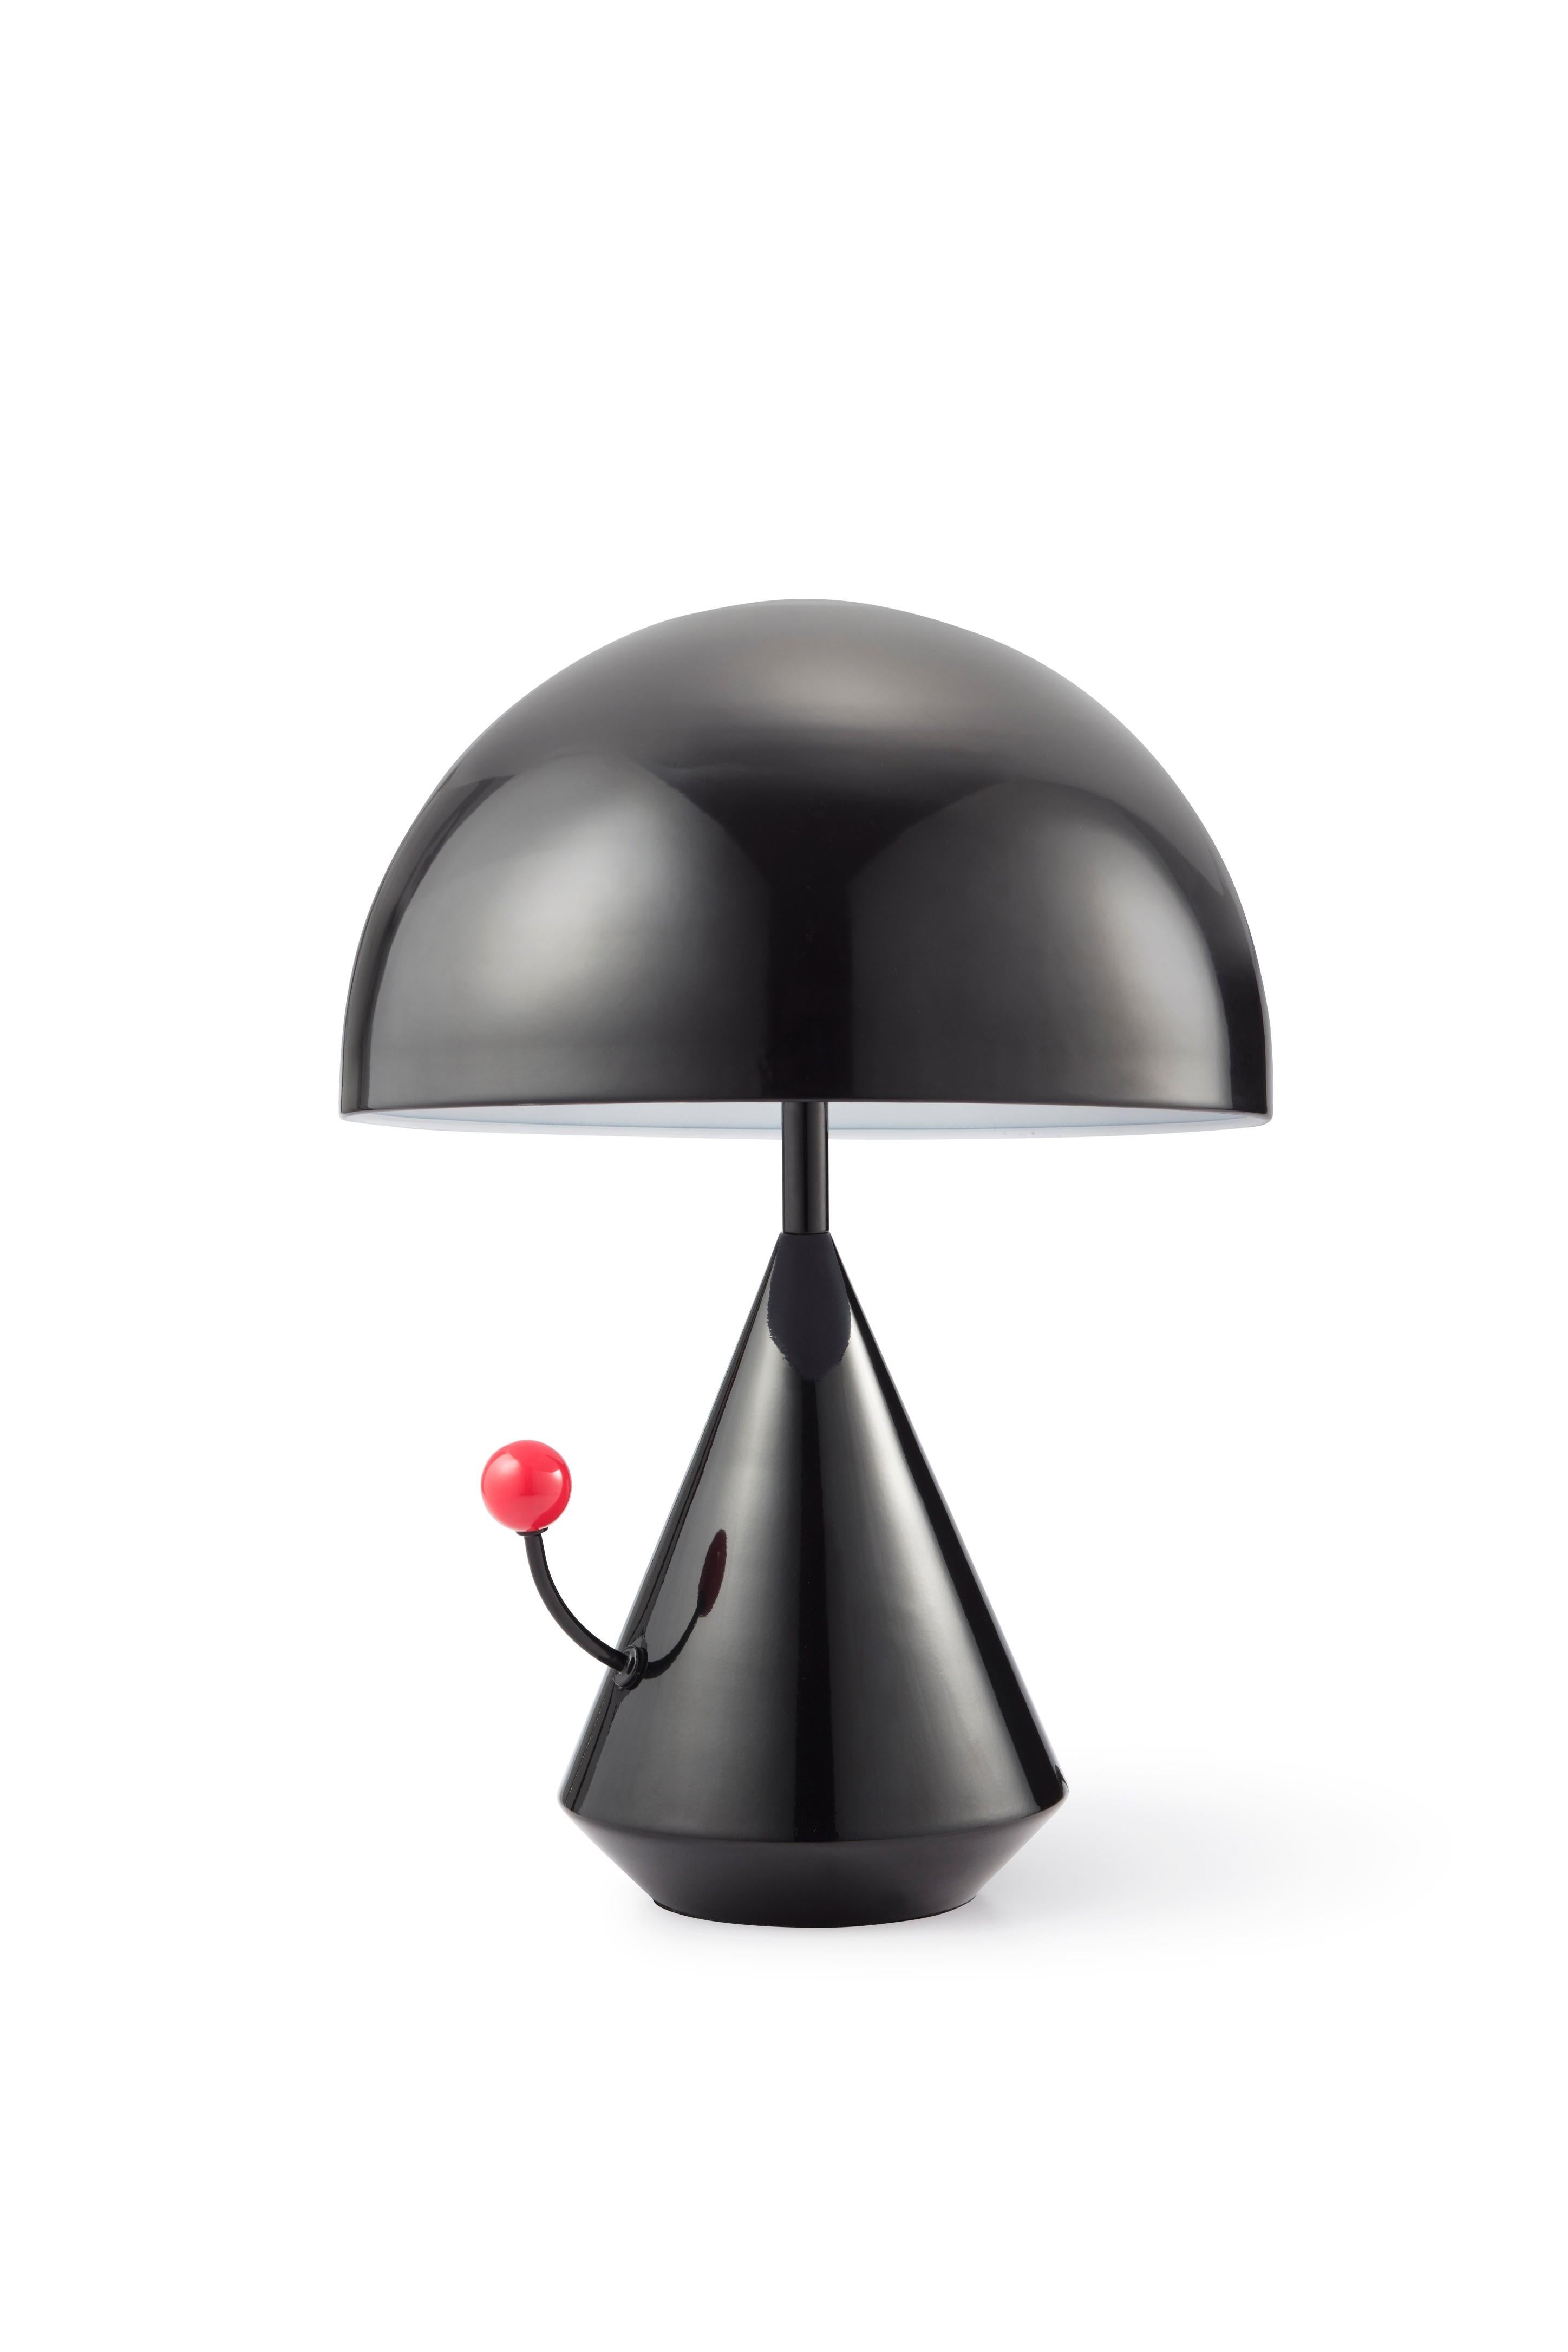 Dali surrealistic table lamp by Thomas Dariel, Maison Dada
Measures: Diameter 31.5 x height 43 cm
Tricolored
Powder coated metal shade, base and framework
Touch switch in color finish
220V – 240V 50Hz E27 max. 60W
Available in 3 color combinations